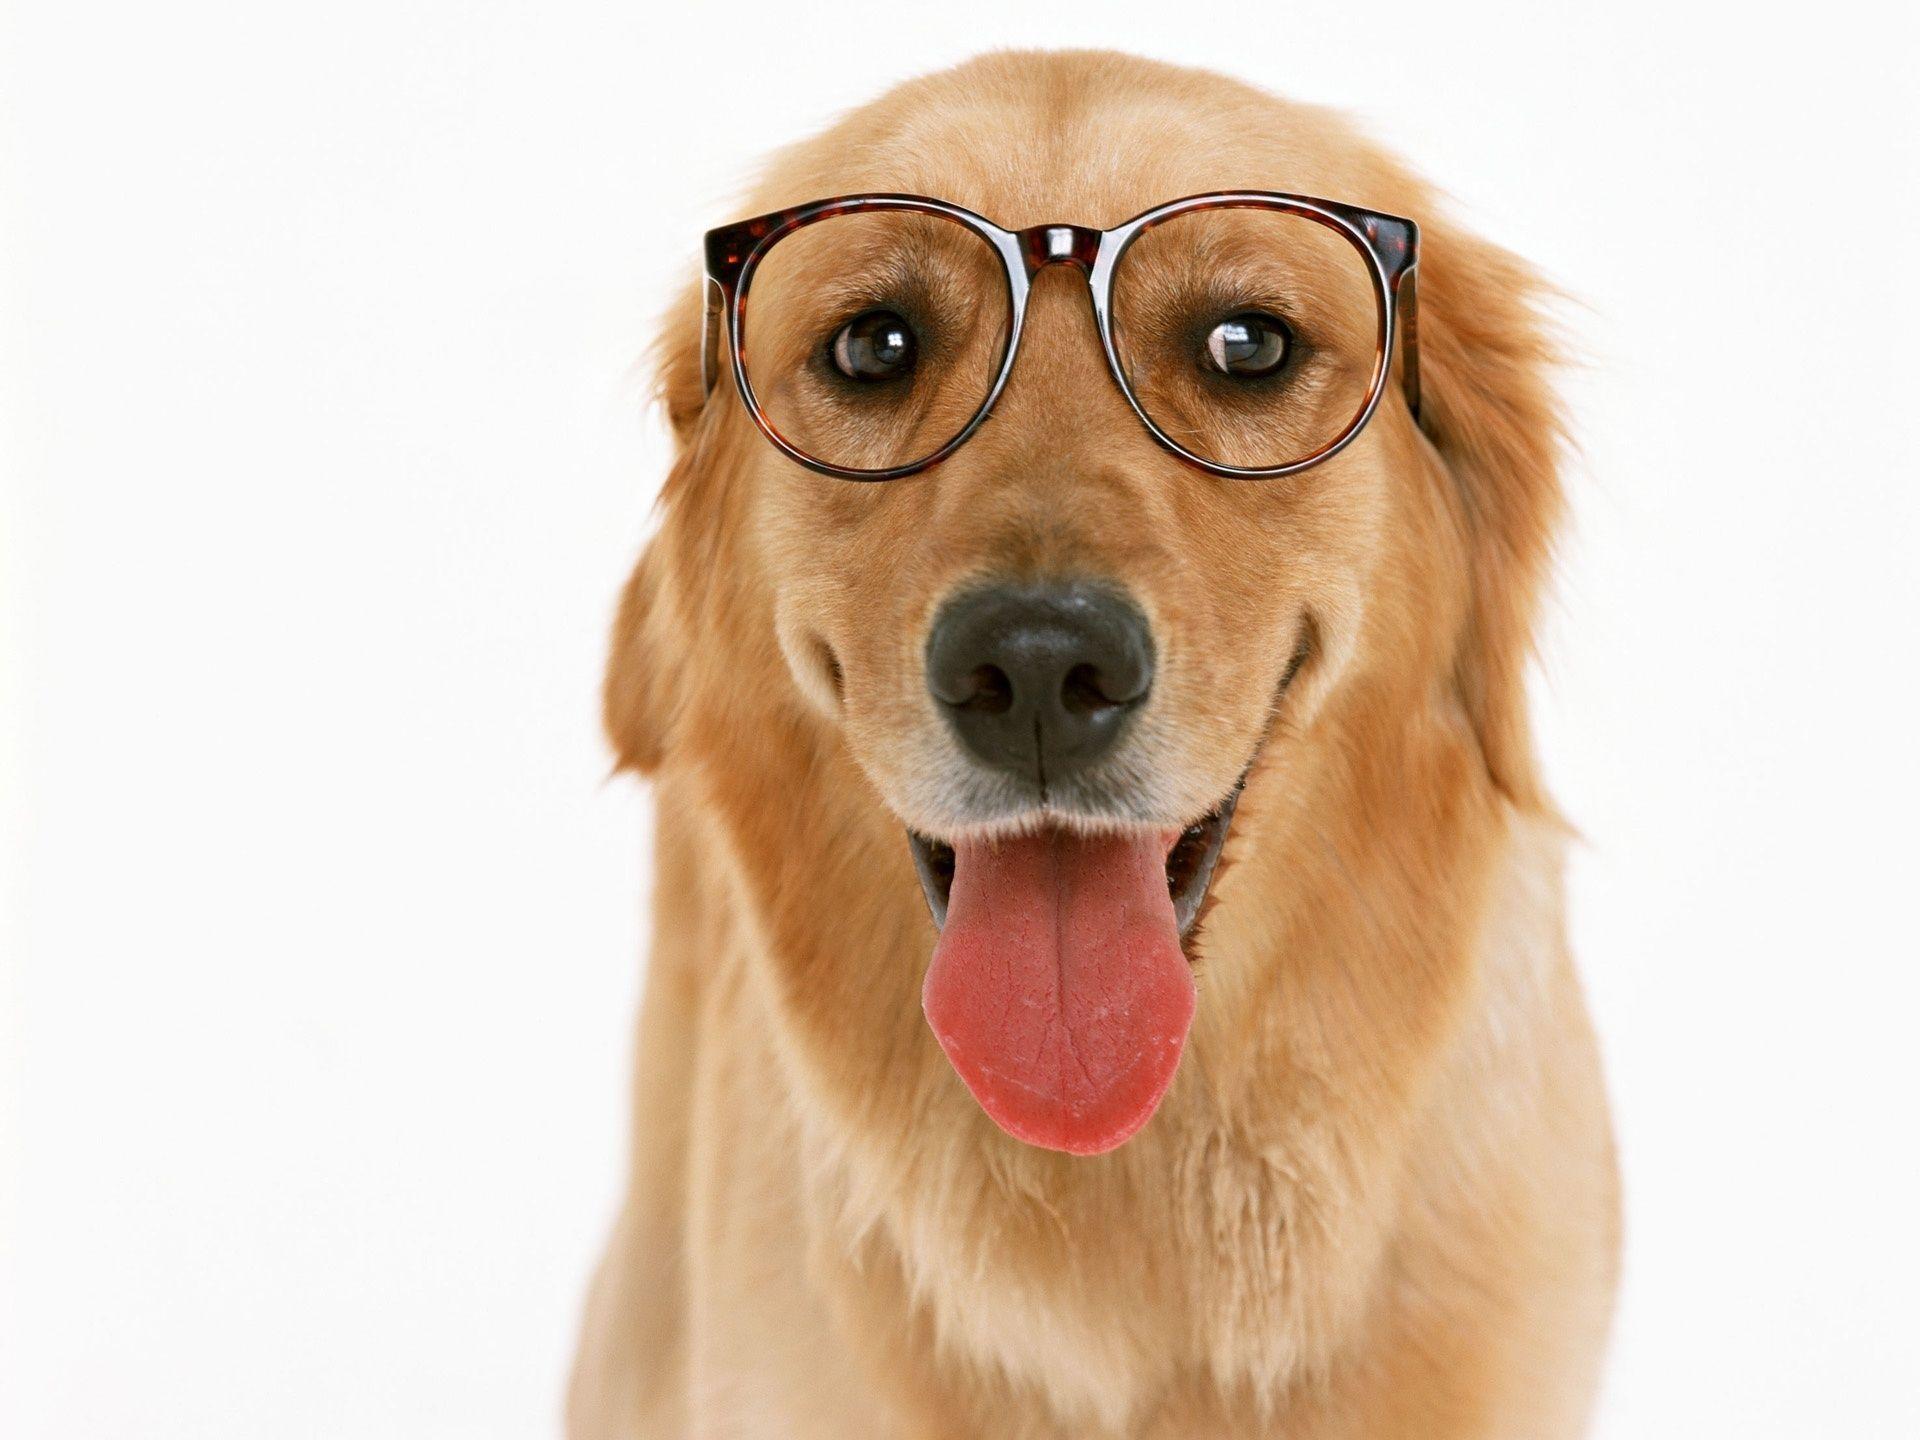 Dog with Glasses Wallpapers - Top Free Dog with Glasses Backgrounds